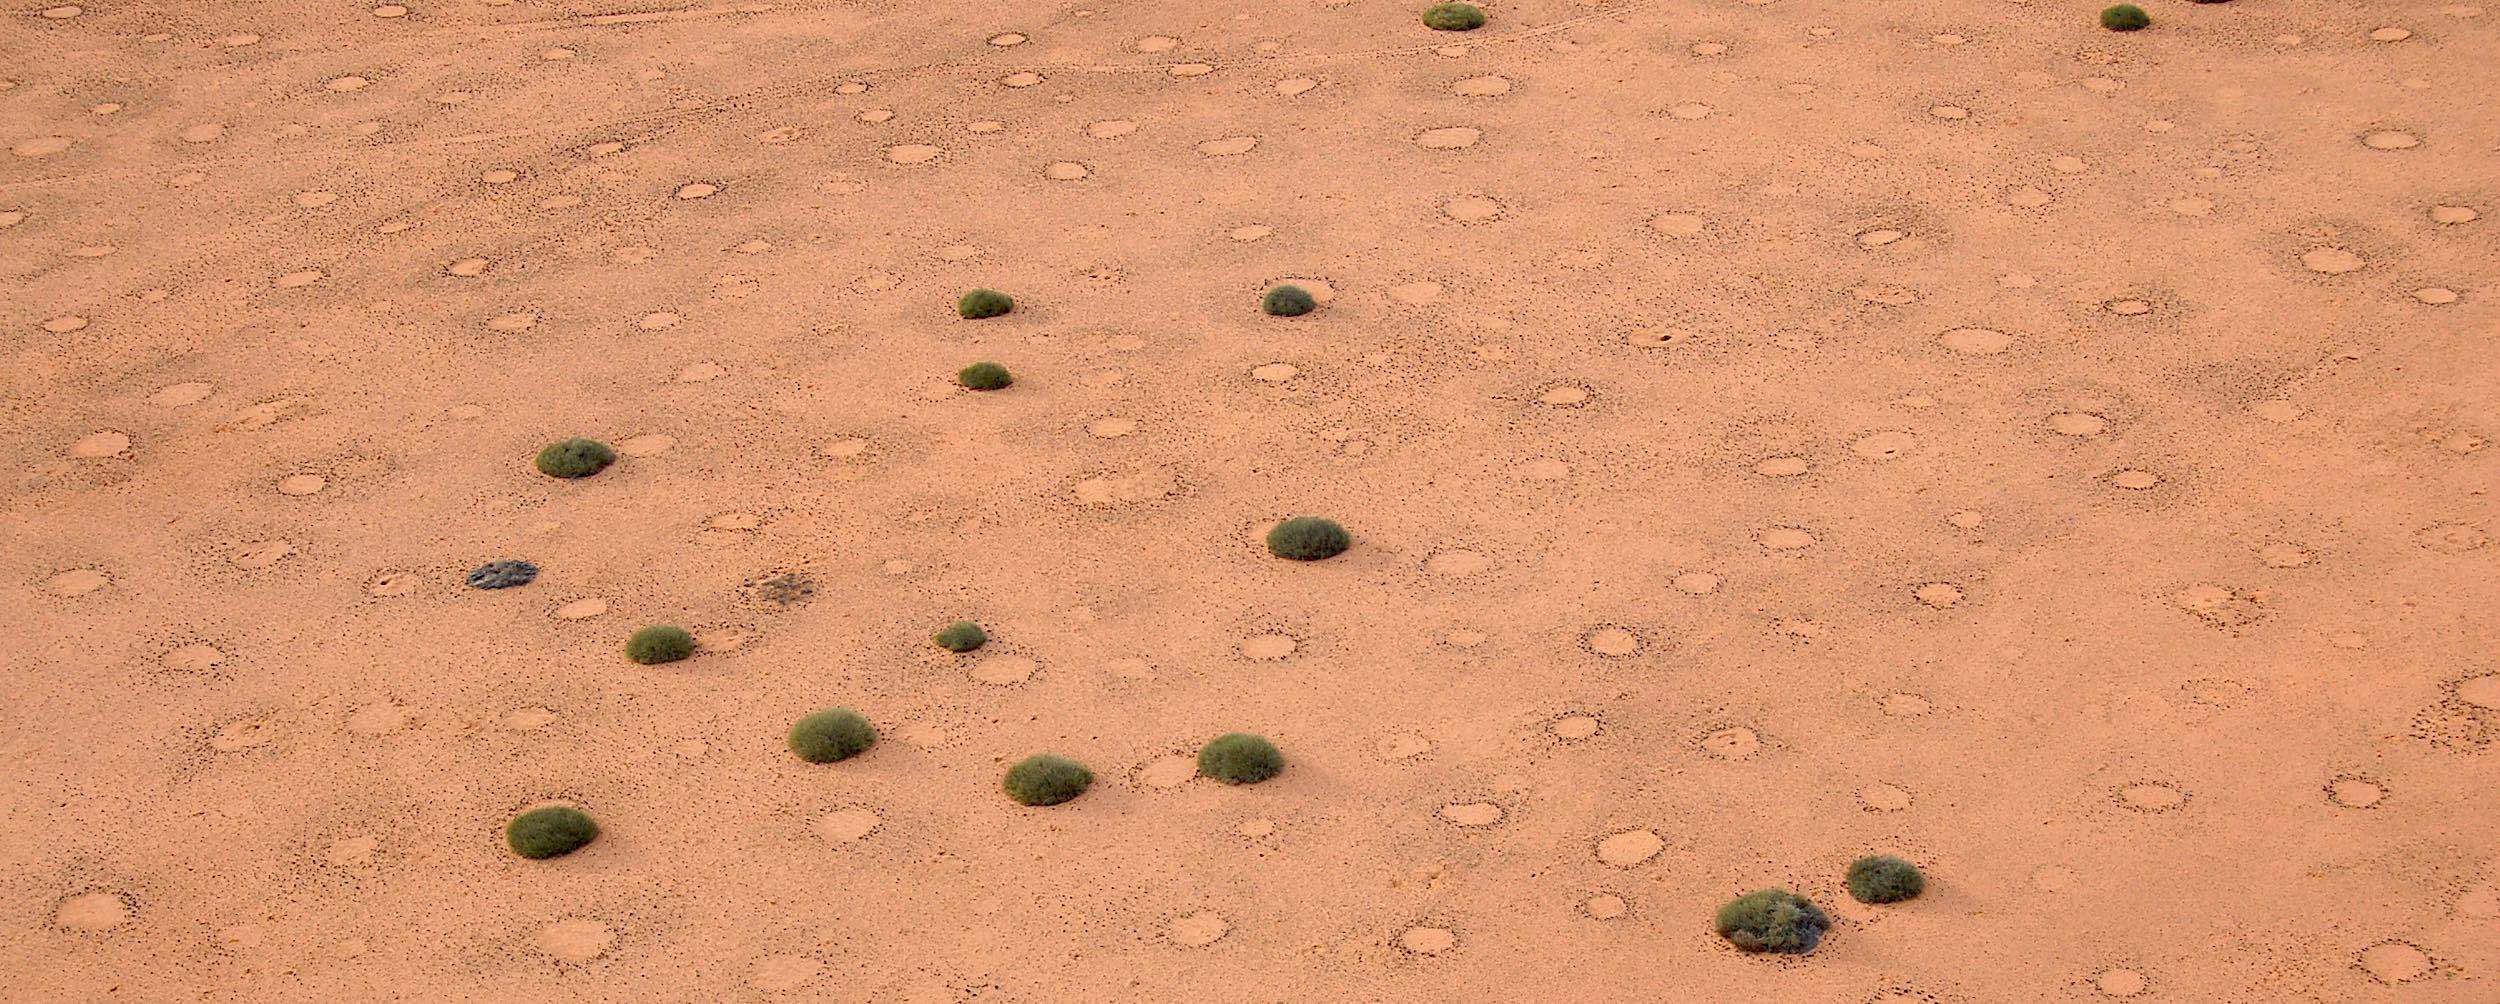 An overhead view of the Namibian desert showing dozens of fairy circles interspaced with euphorbia bushes.